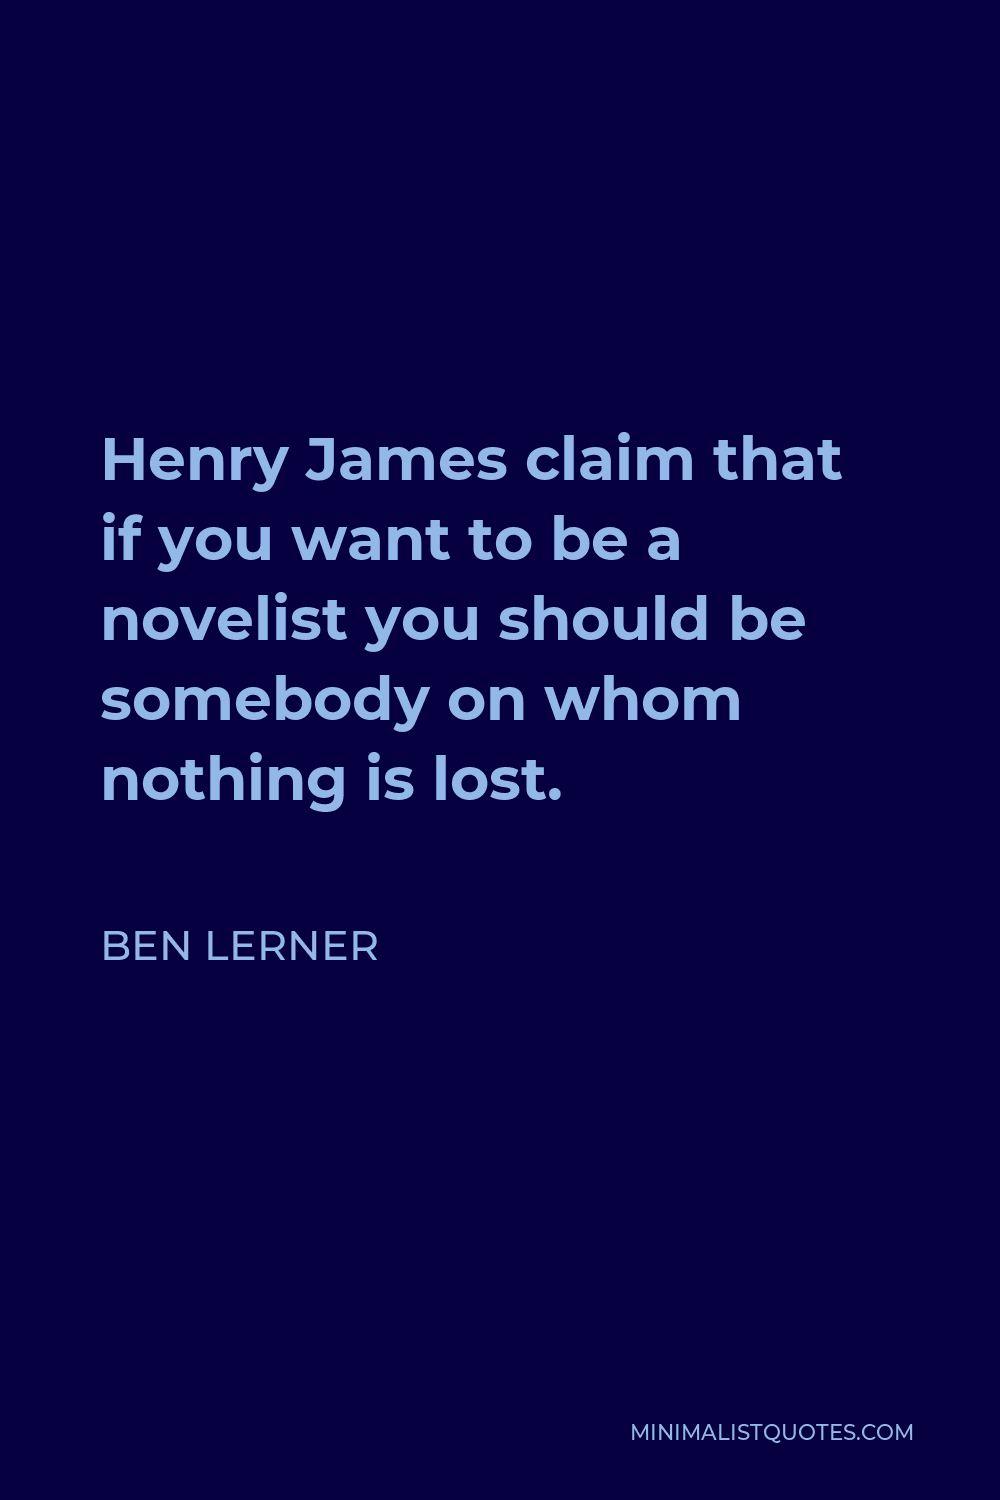 Ben Lerner Quote - Henry James claim that if you want to be a novelist you should be somebody on whom nothing is lost.